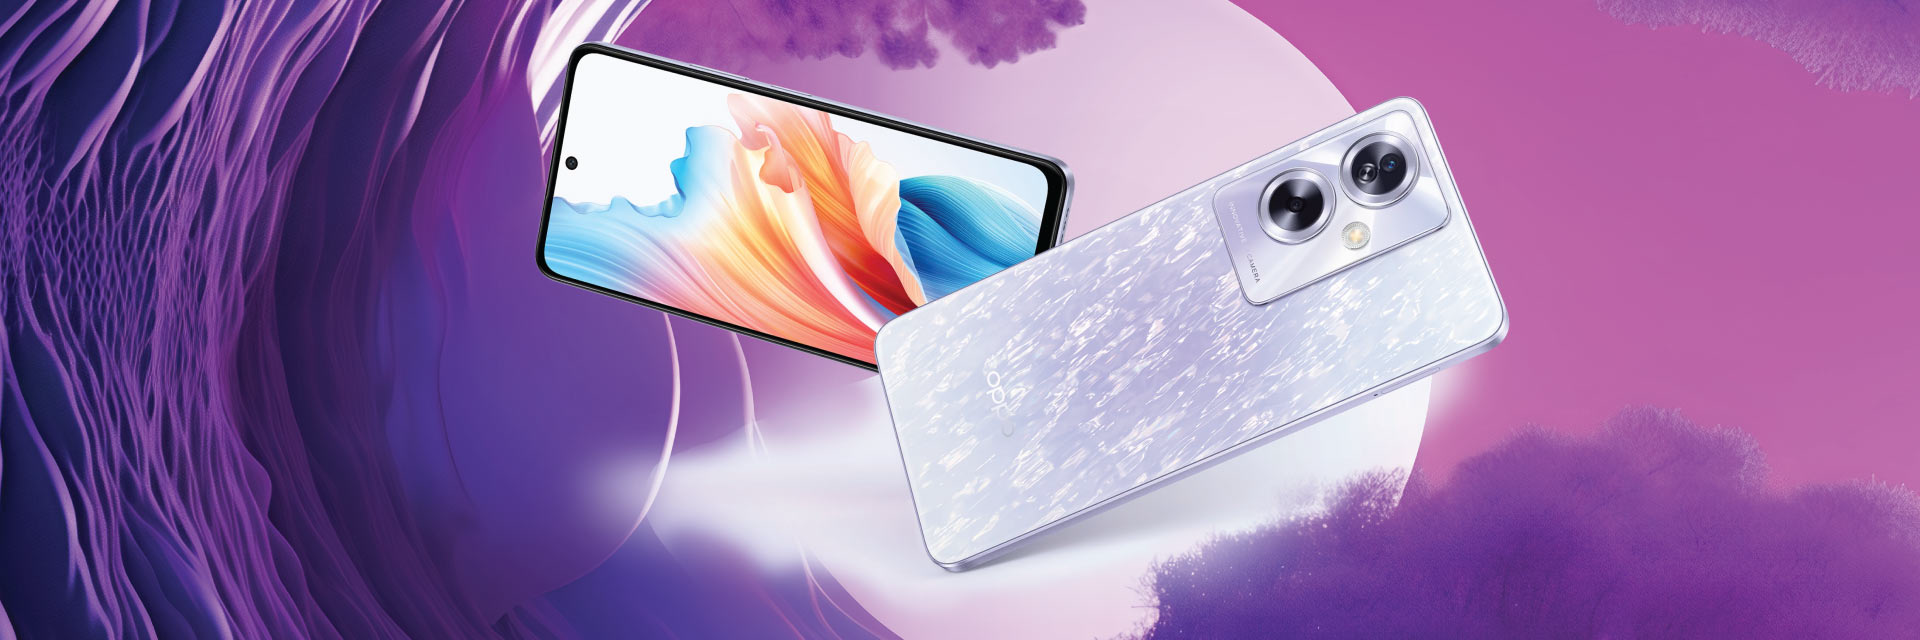 Oppo brand page lifestyle banner